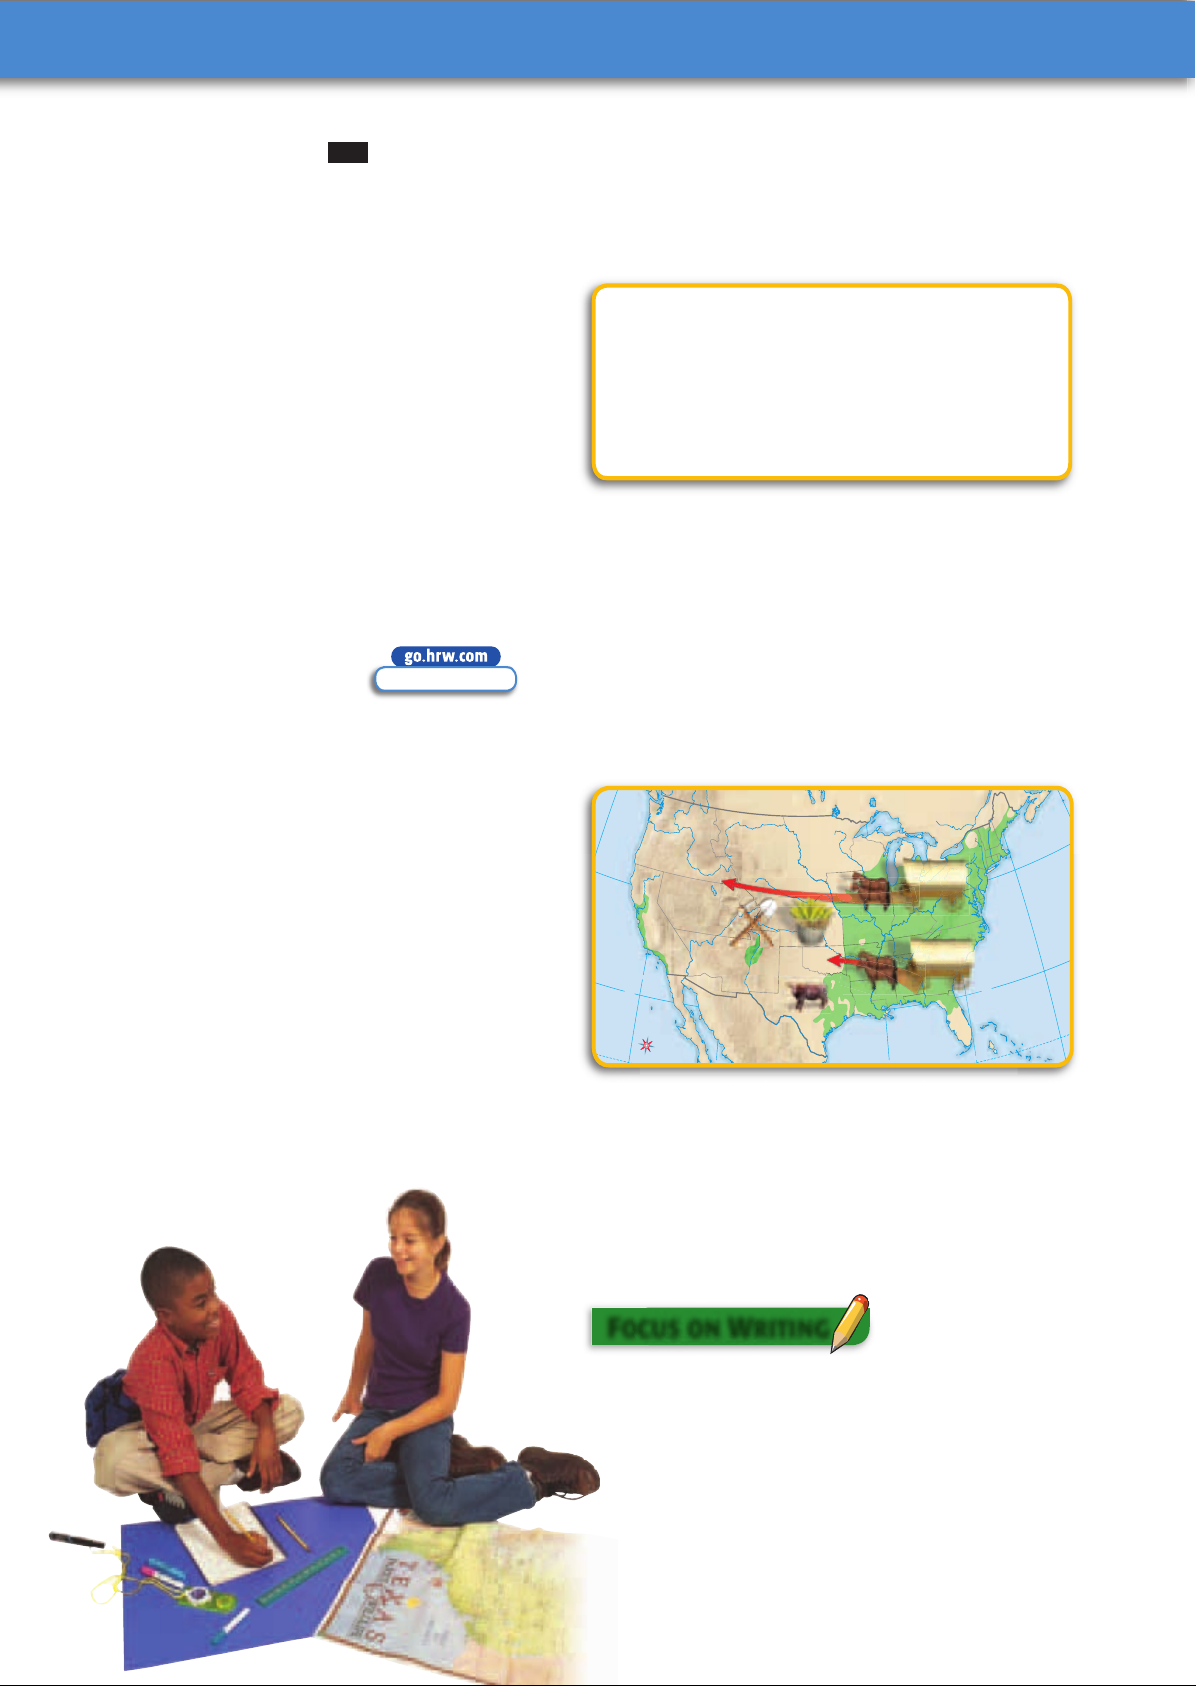 US_History_Textbook_8th_Grade_Chapter_17_Americans_Move_West_F2oKcnl Image-24